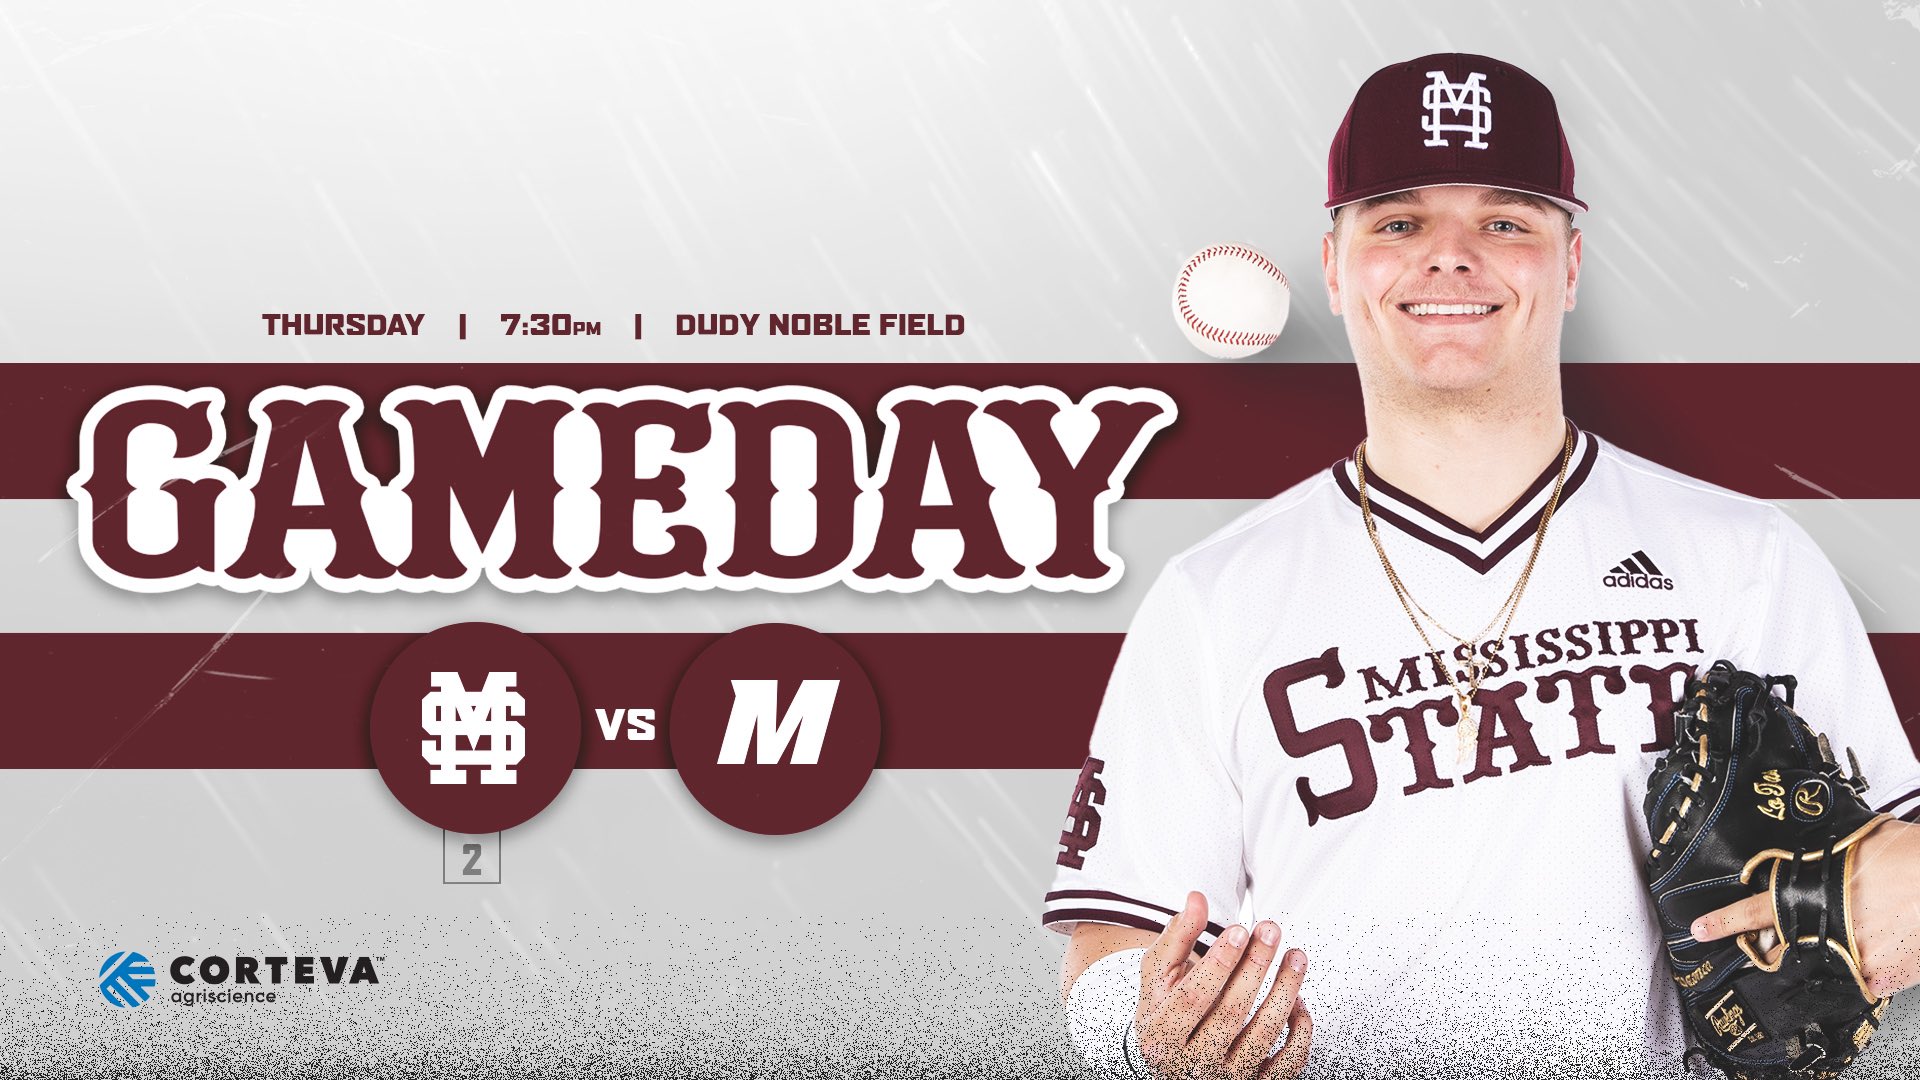 Maroon, white and gray graphic with image of MSU baseball player Logan Tanner smiling and tossing a baseball in the air